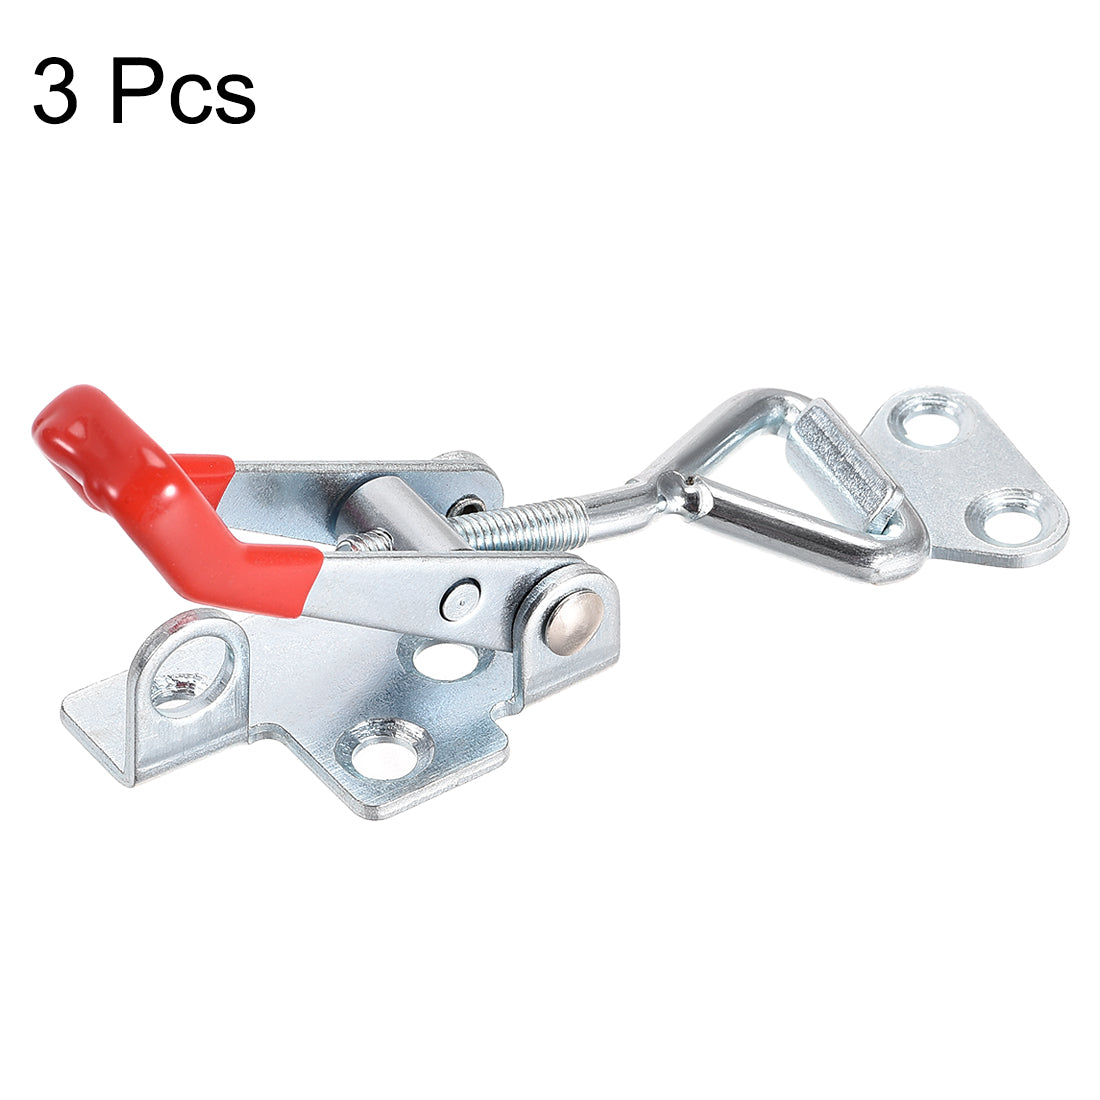 uxcell Uxcell 220lbs Holding Capacity Iron Pull-Action Latch Adjustable Toggle Clamp, 3 Pcs